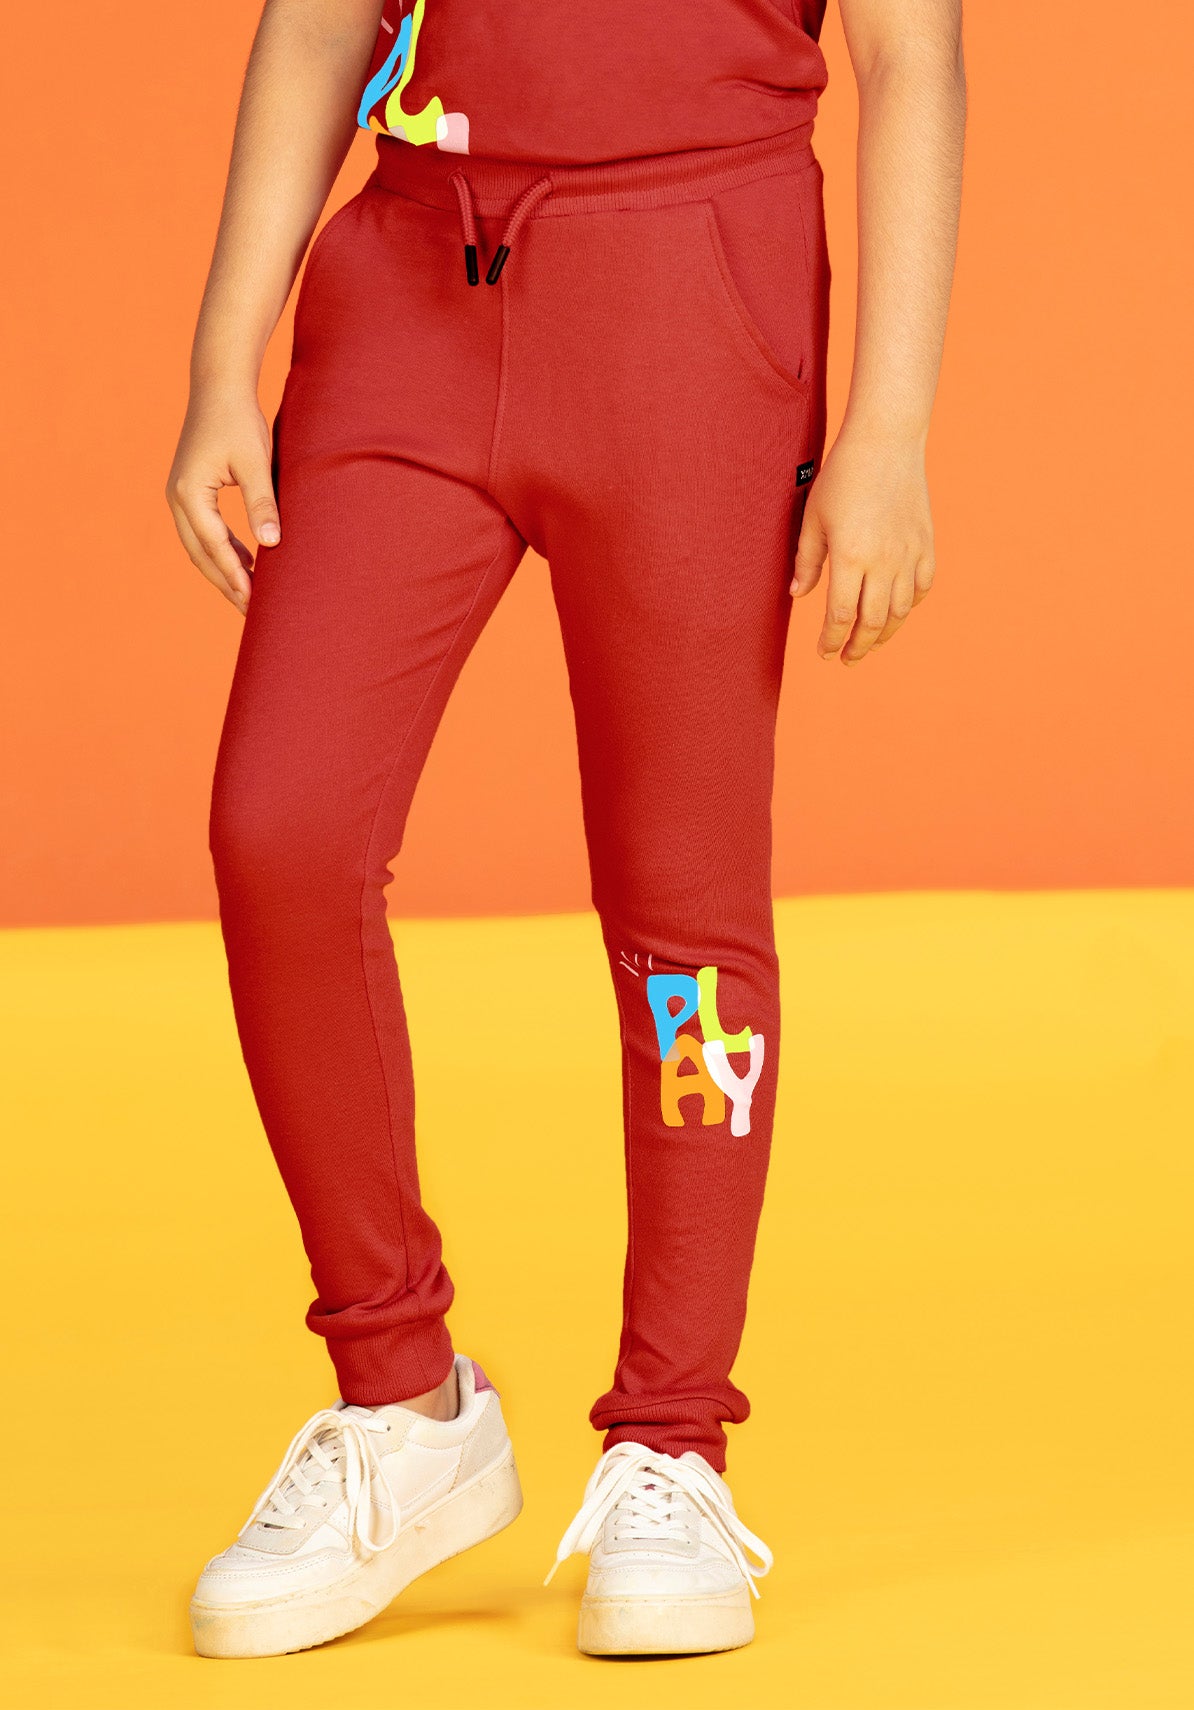 Boys' Red Joggers